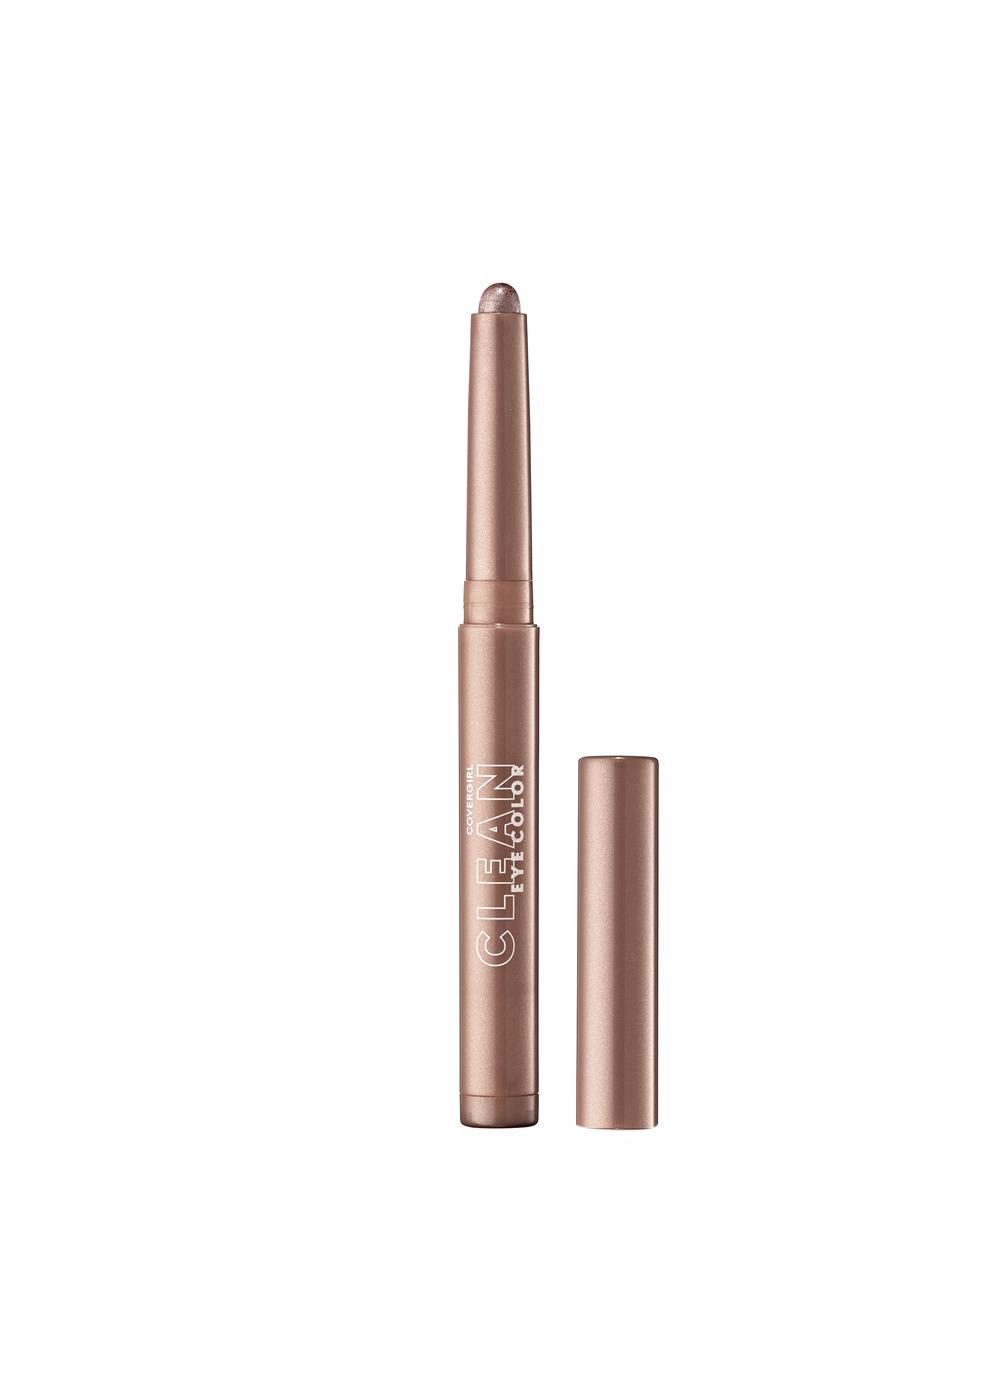 Covergirl Clean Eye Color - Bronze Glow; image 1 of 3